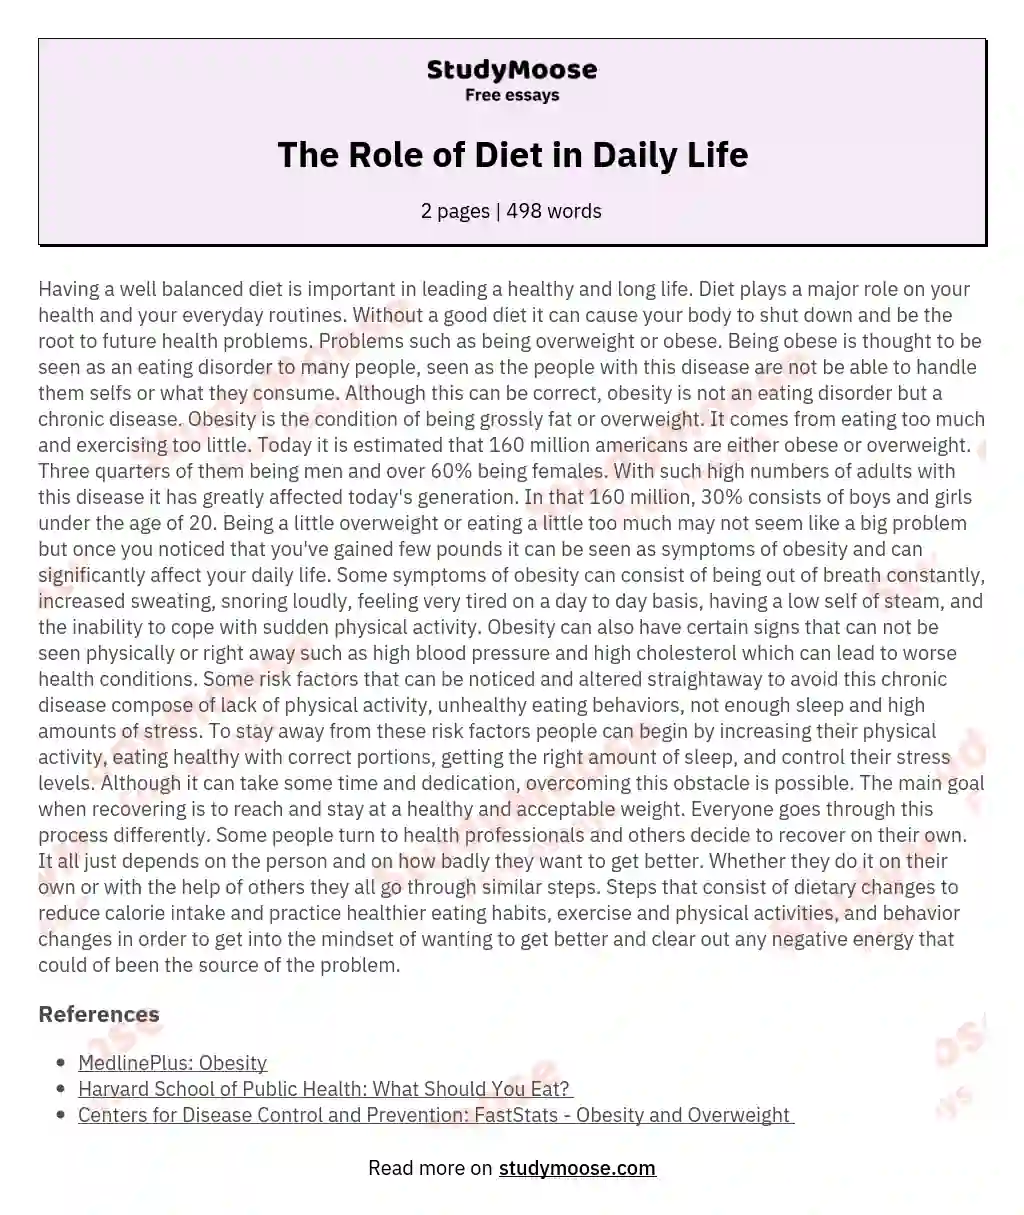 The Role of Diet in Daily Life essay